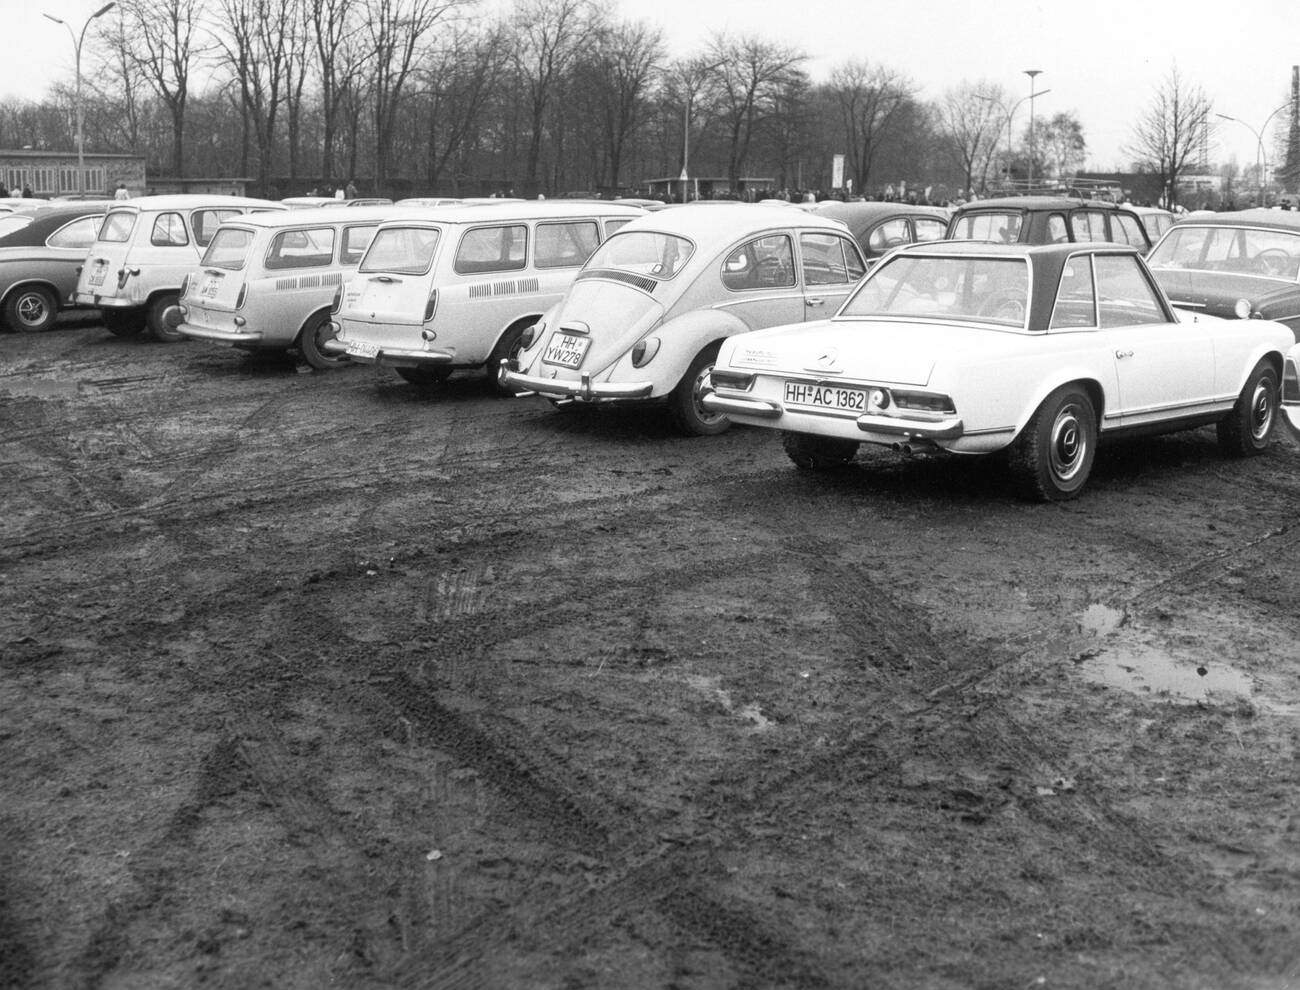 The parking lot of Volksparkstadion in Hamburg, Germany in 1971.